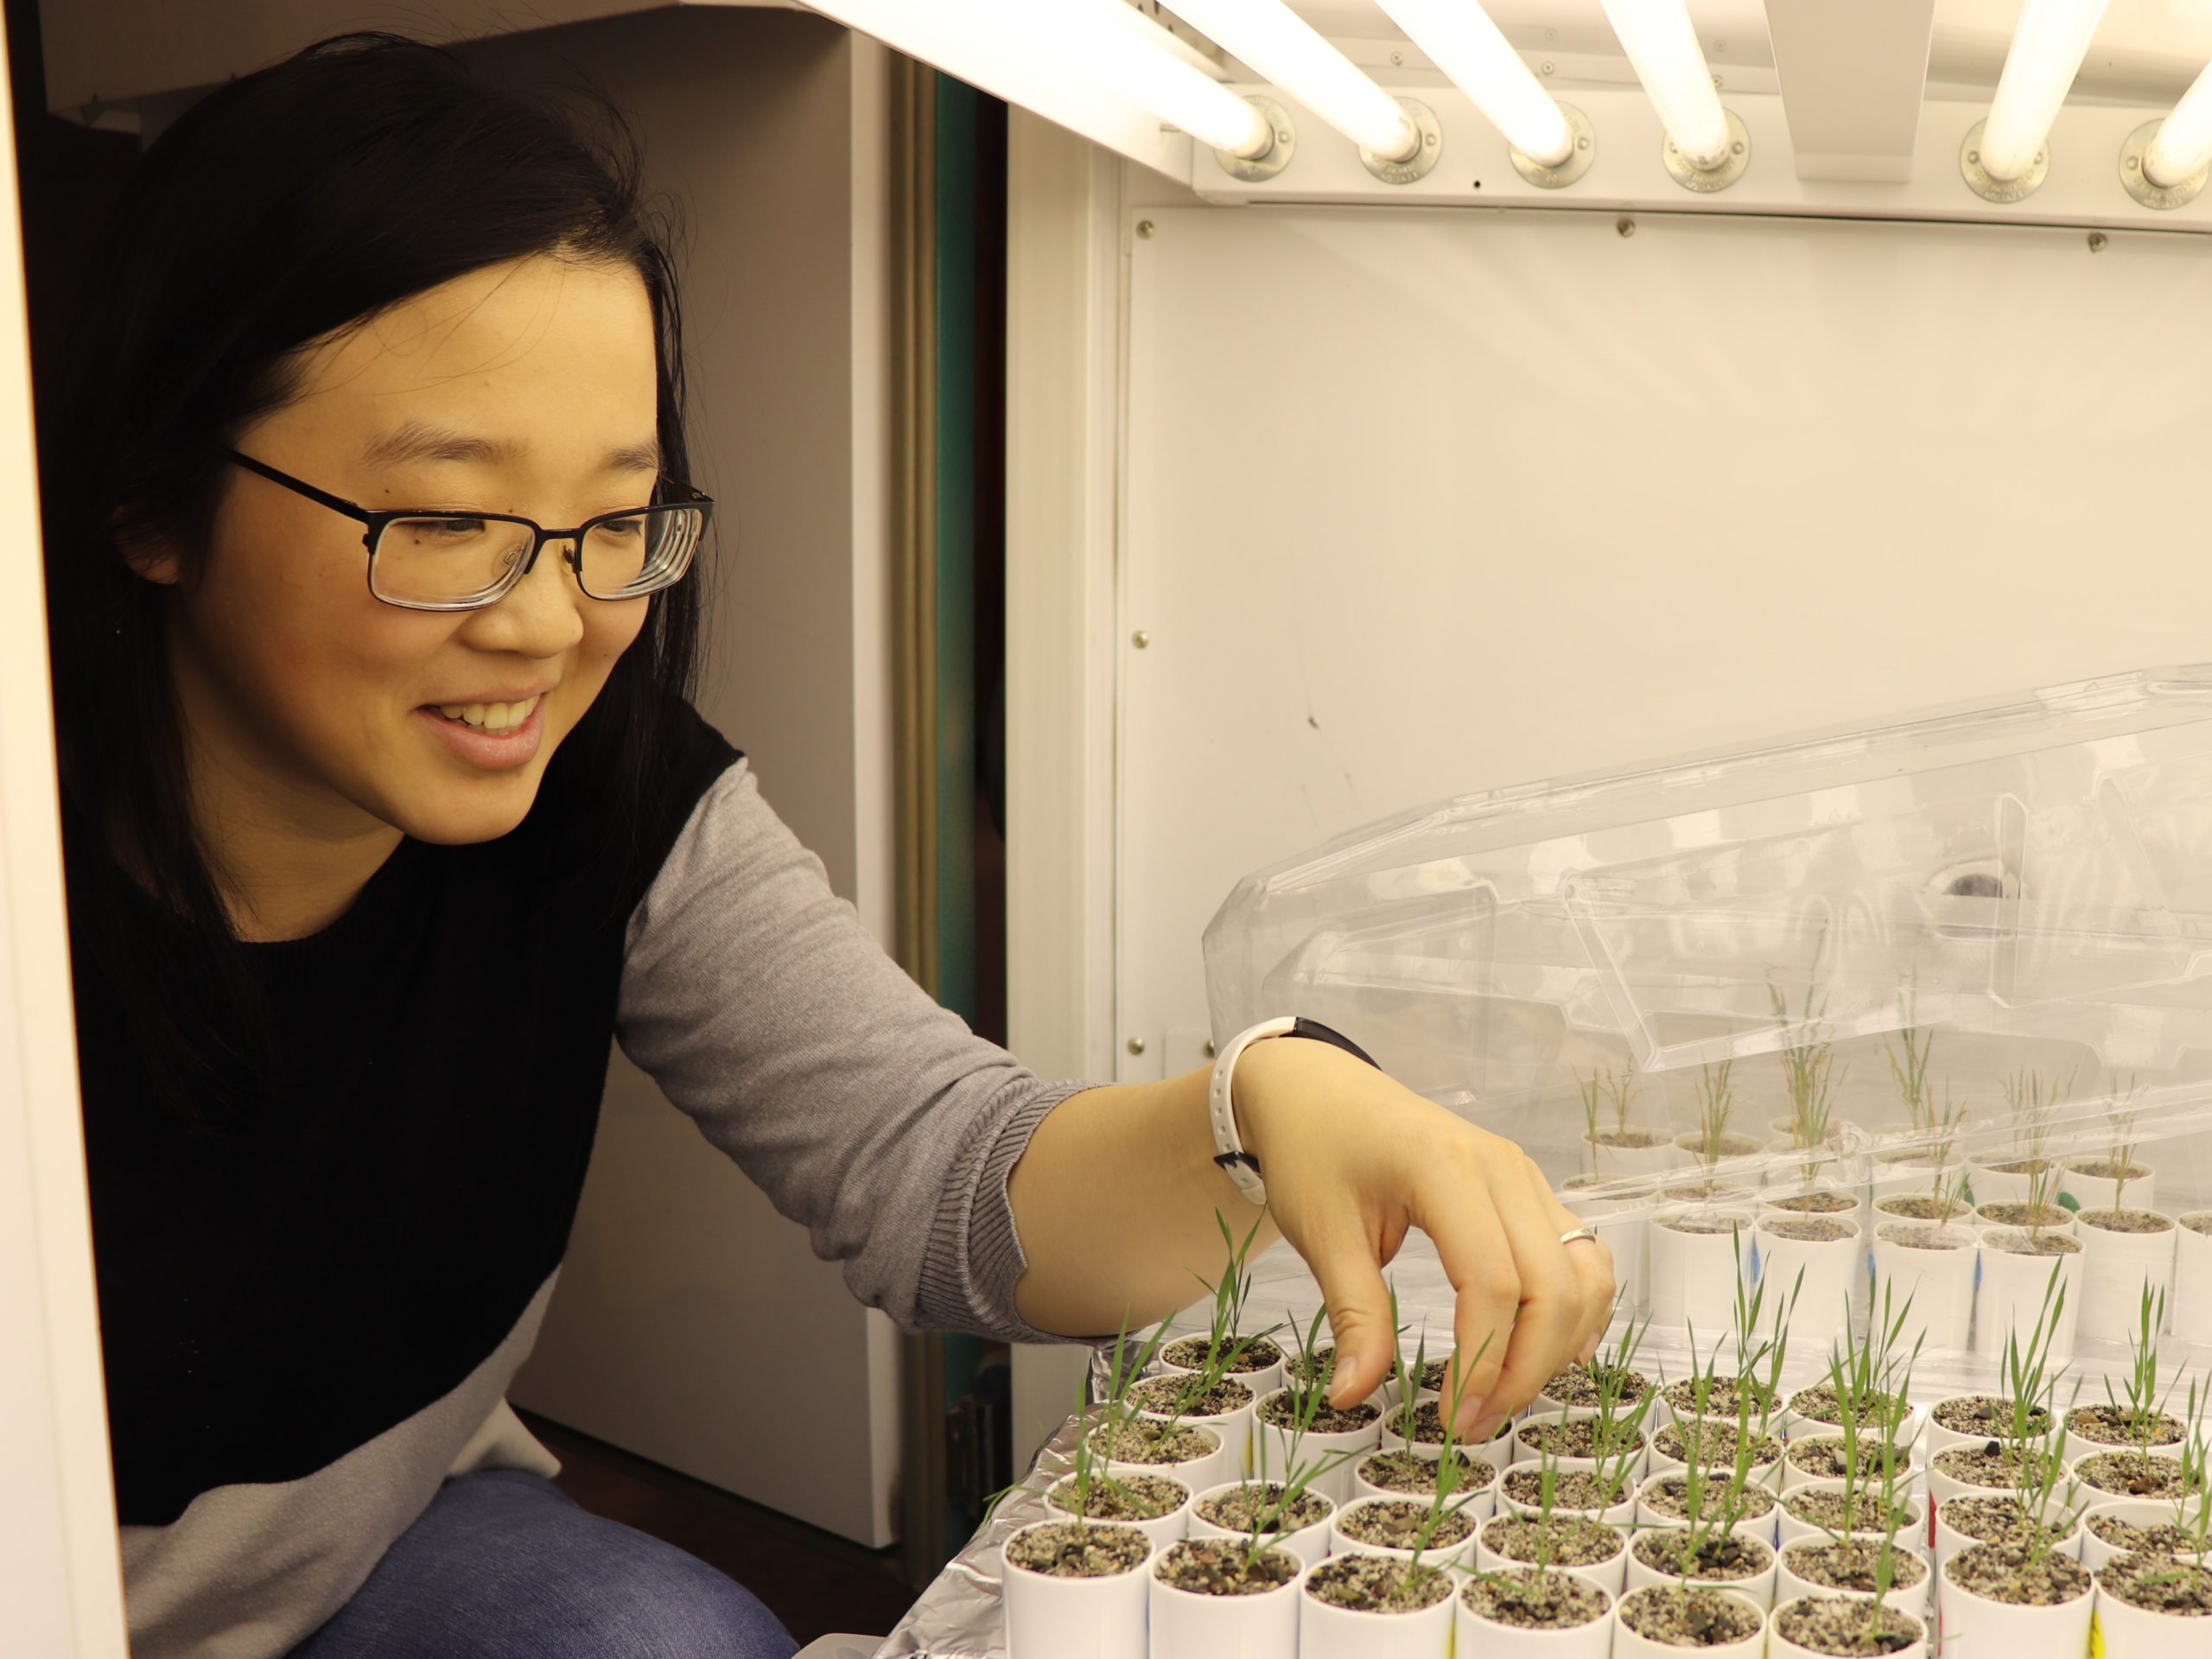 A medium closeup photo of Shiqi Zhang looking at some small plants in a growth chamber.